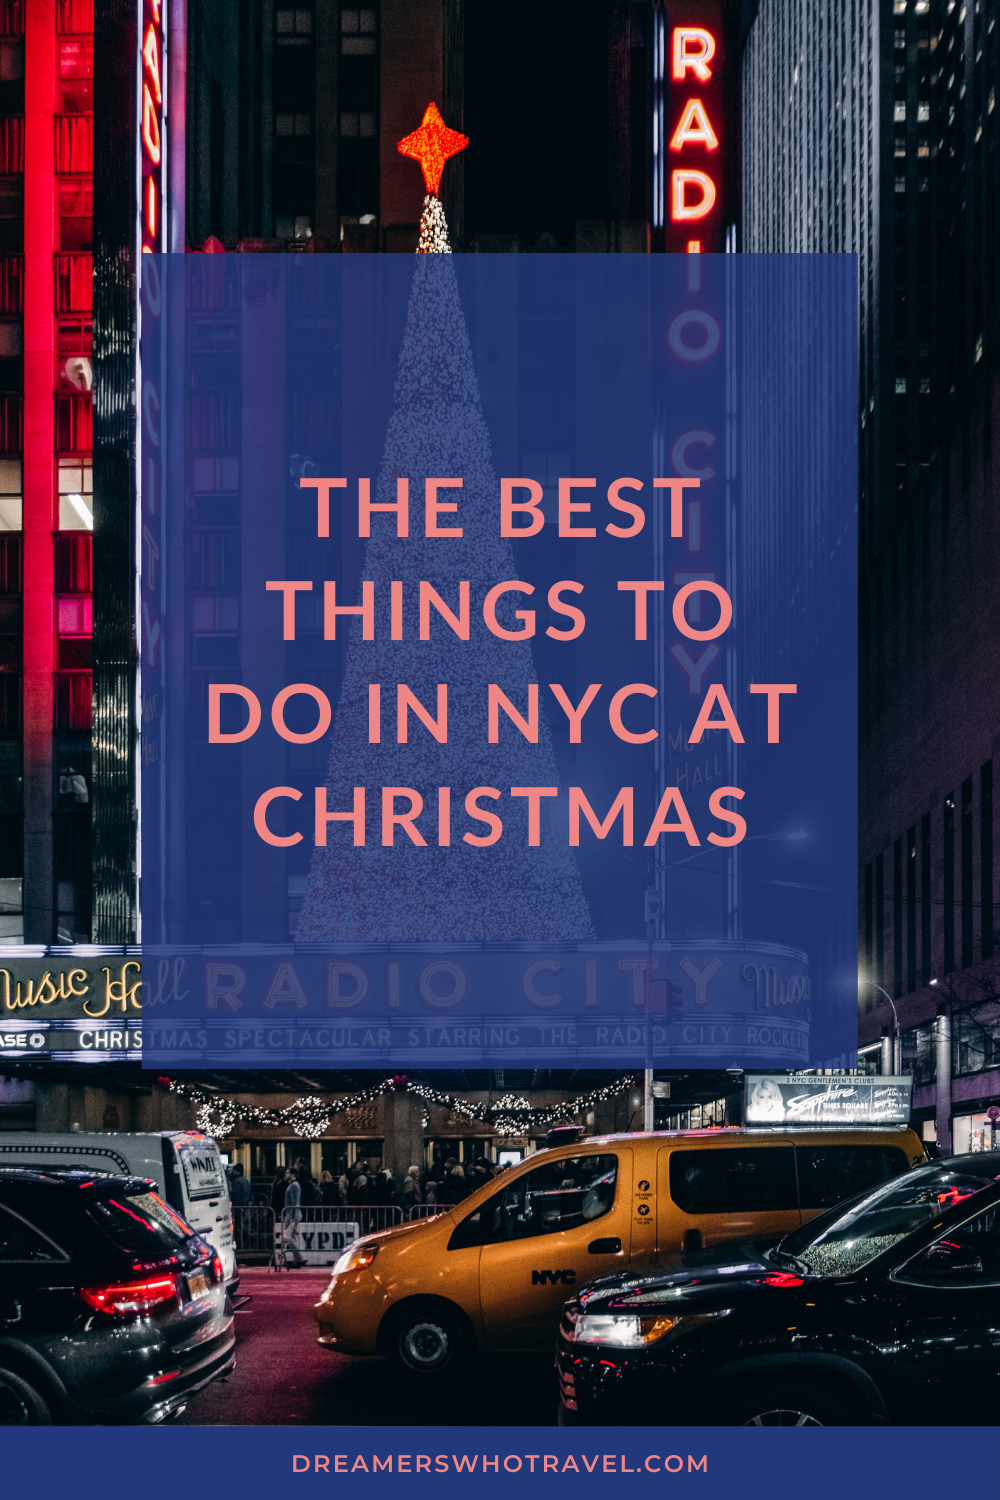 THE BEST THINGS TO DO IN NYC AT CHRISTMAS